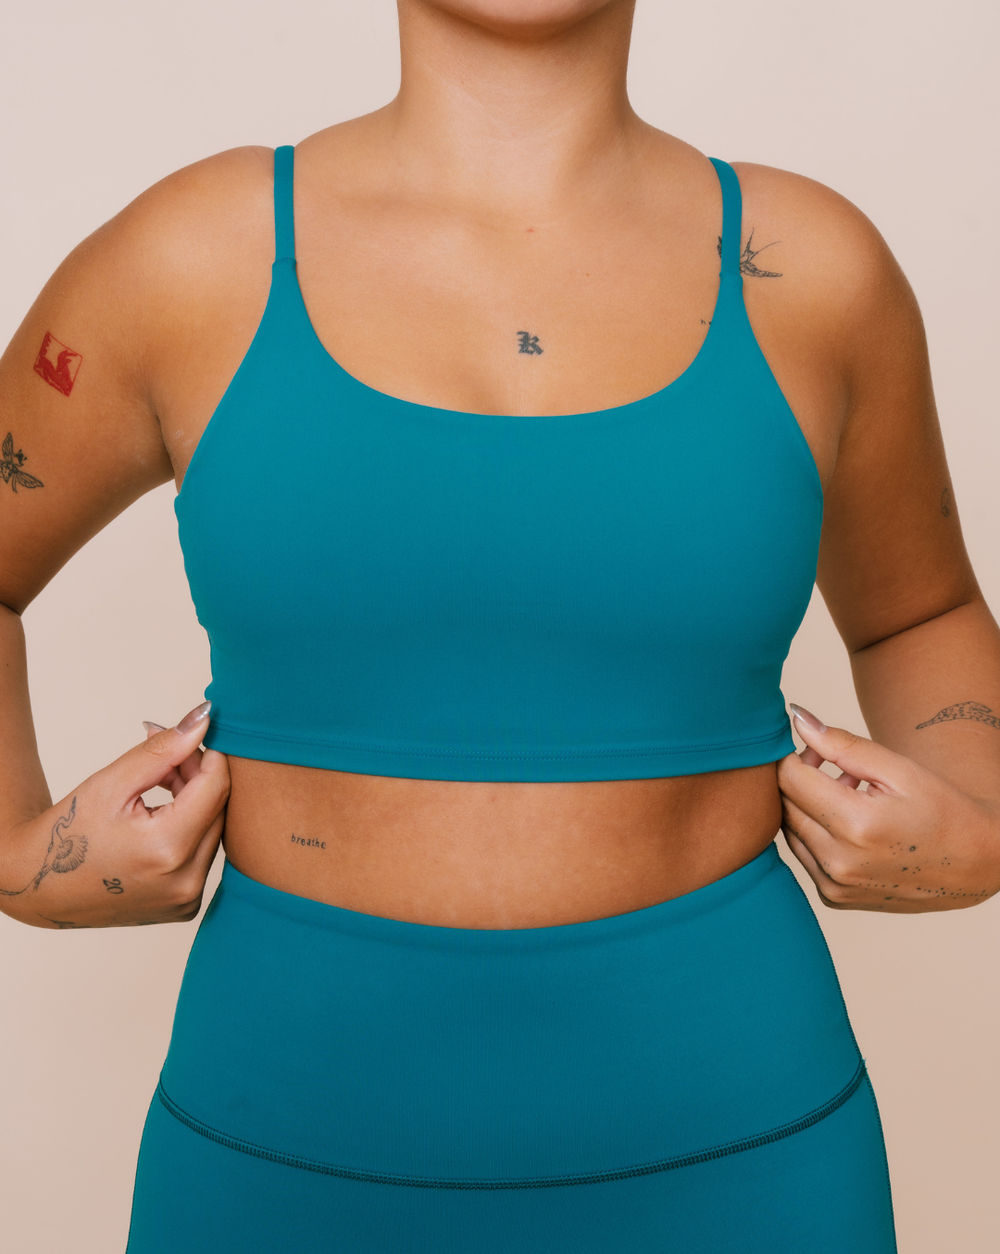 Teal green yoga attire for all body types